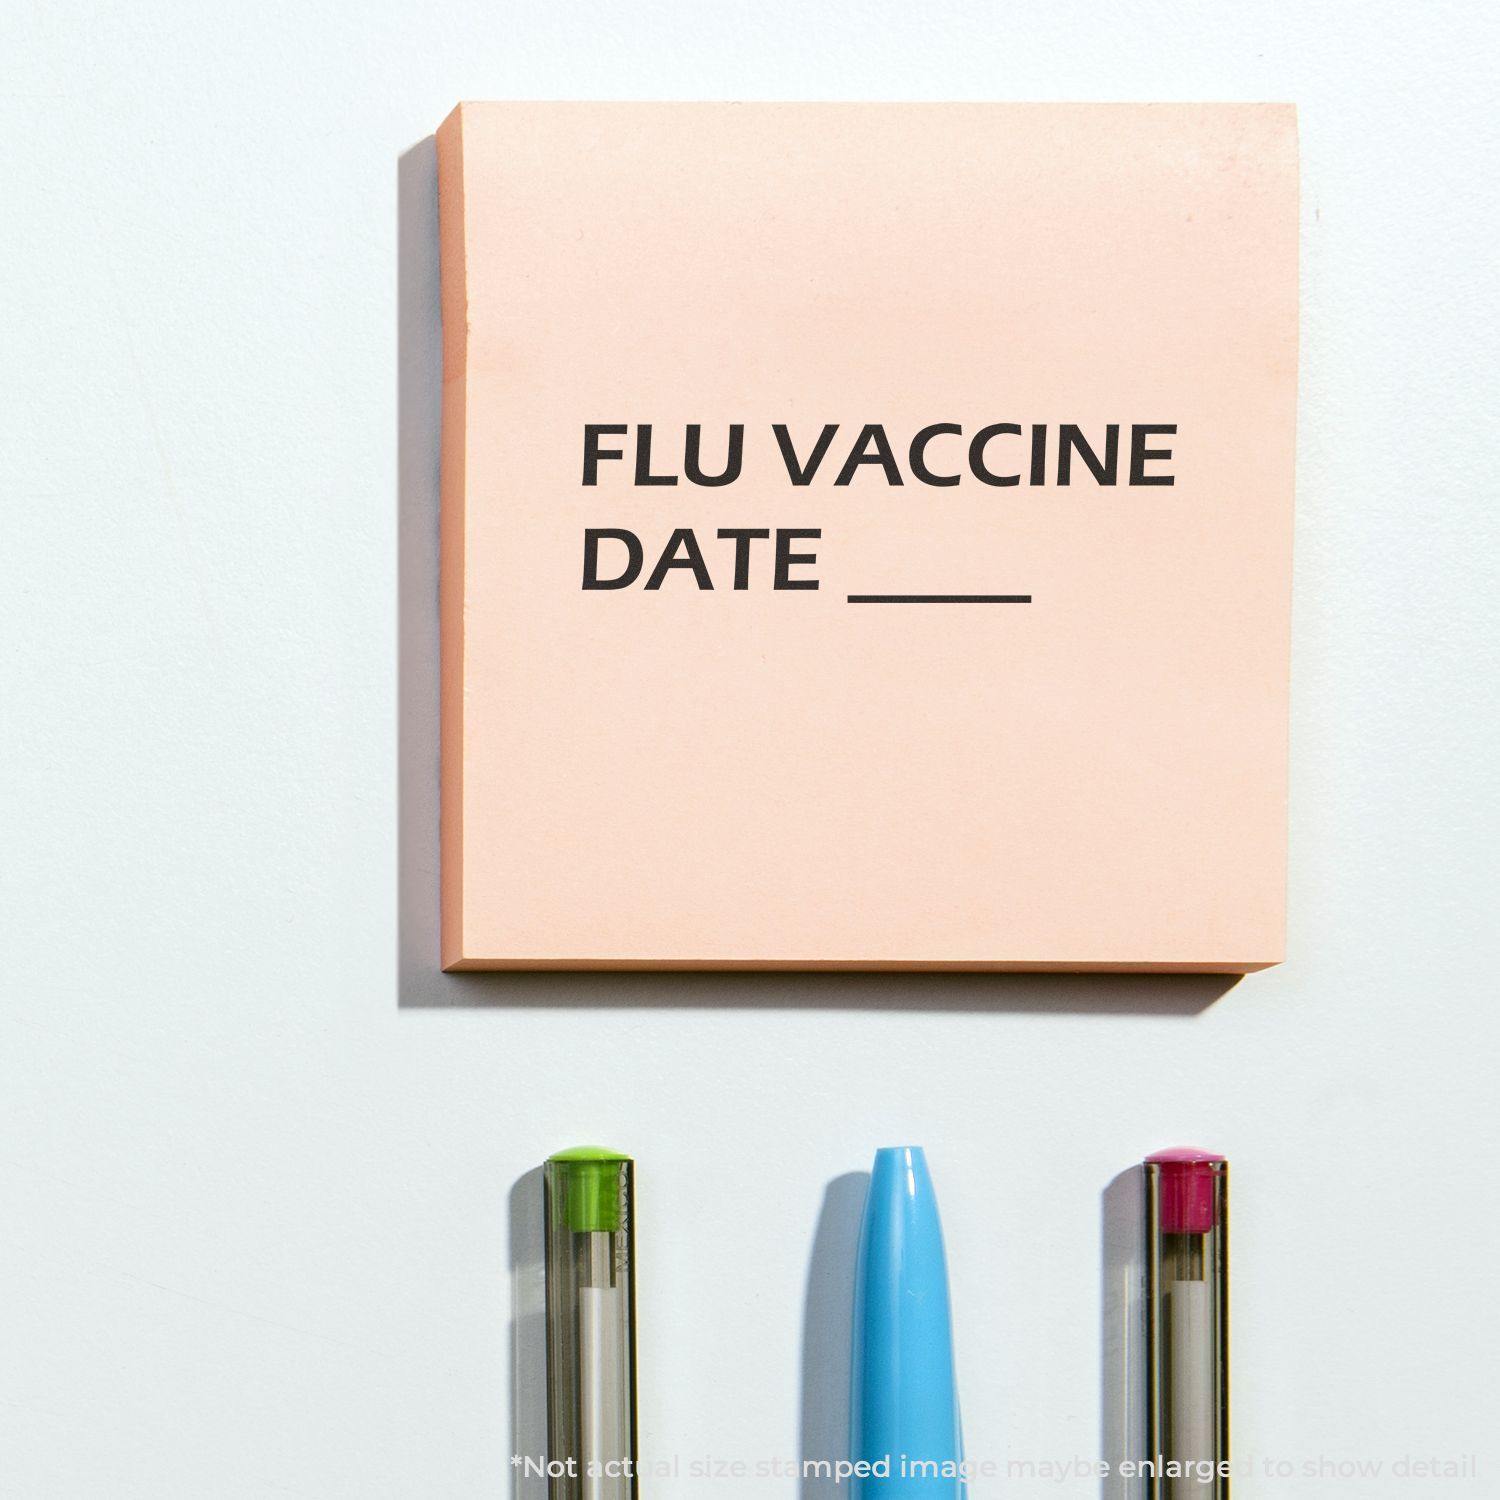 A stock office pre-inked stamp with a stamped image showing how the text "FLU VACCINE DATE" with a line is displayed after stamping.